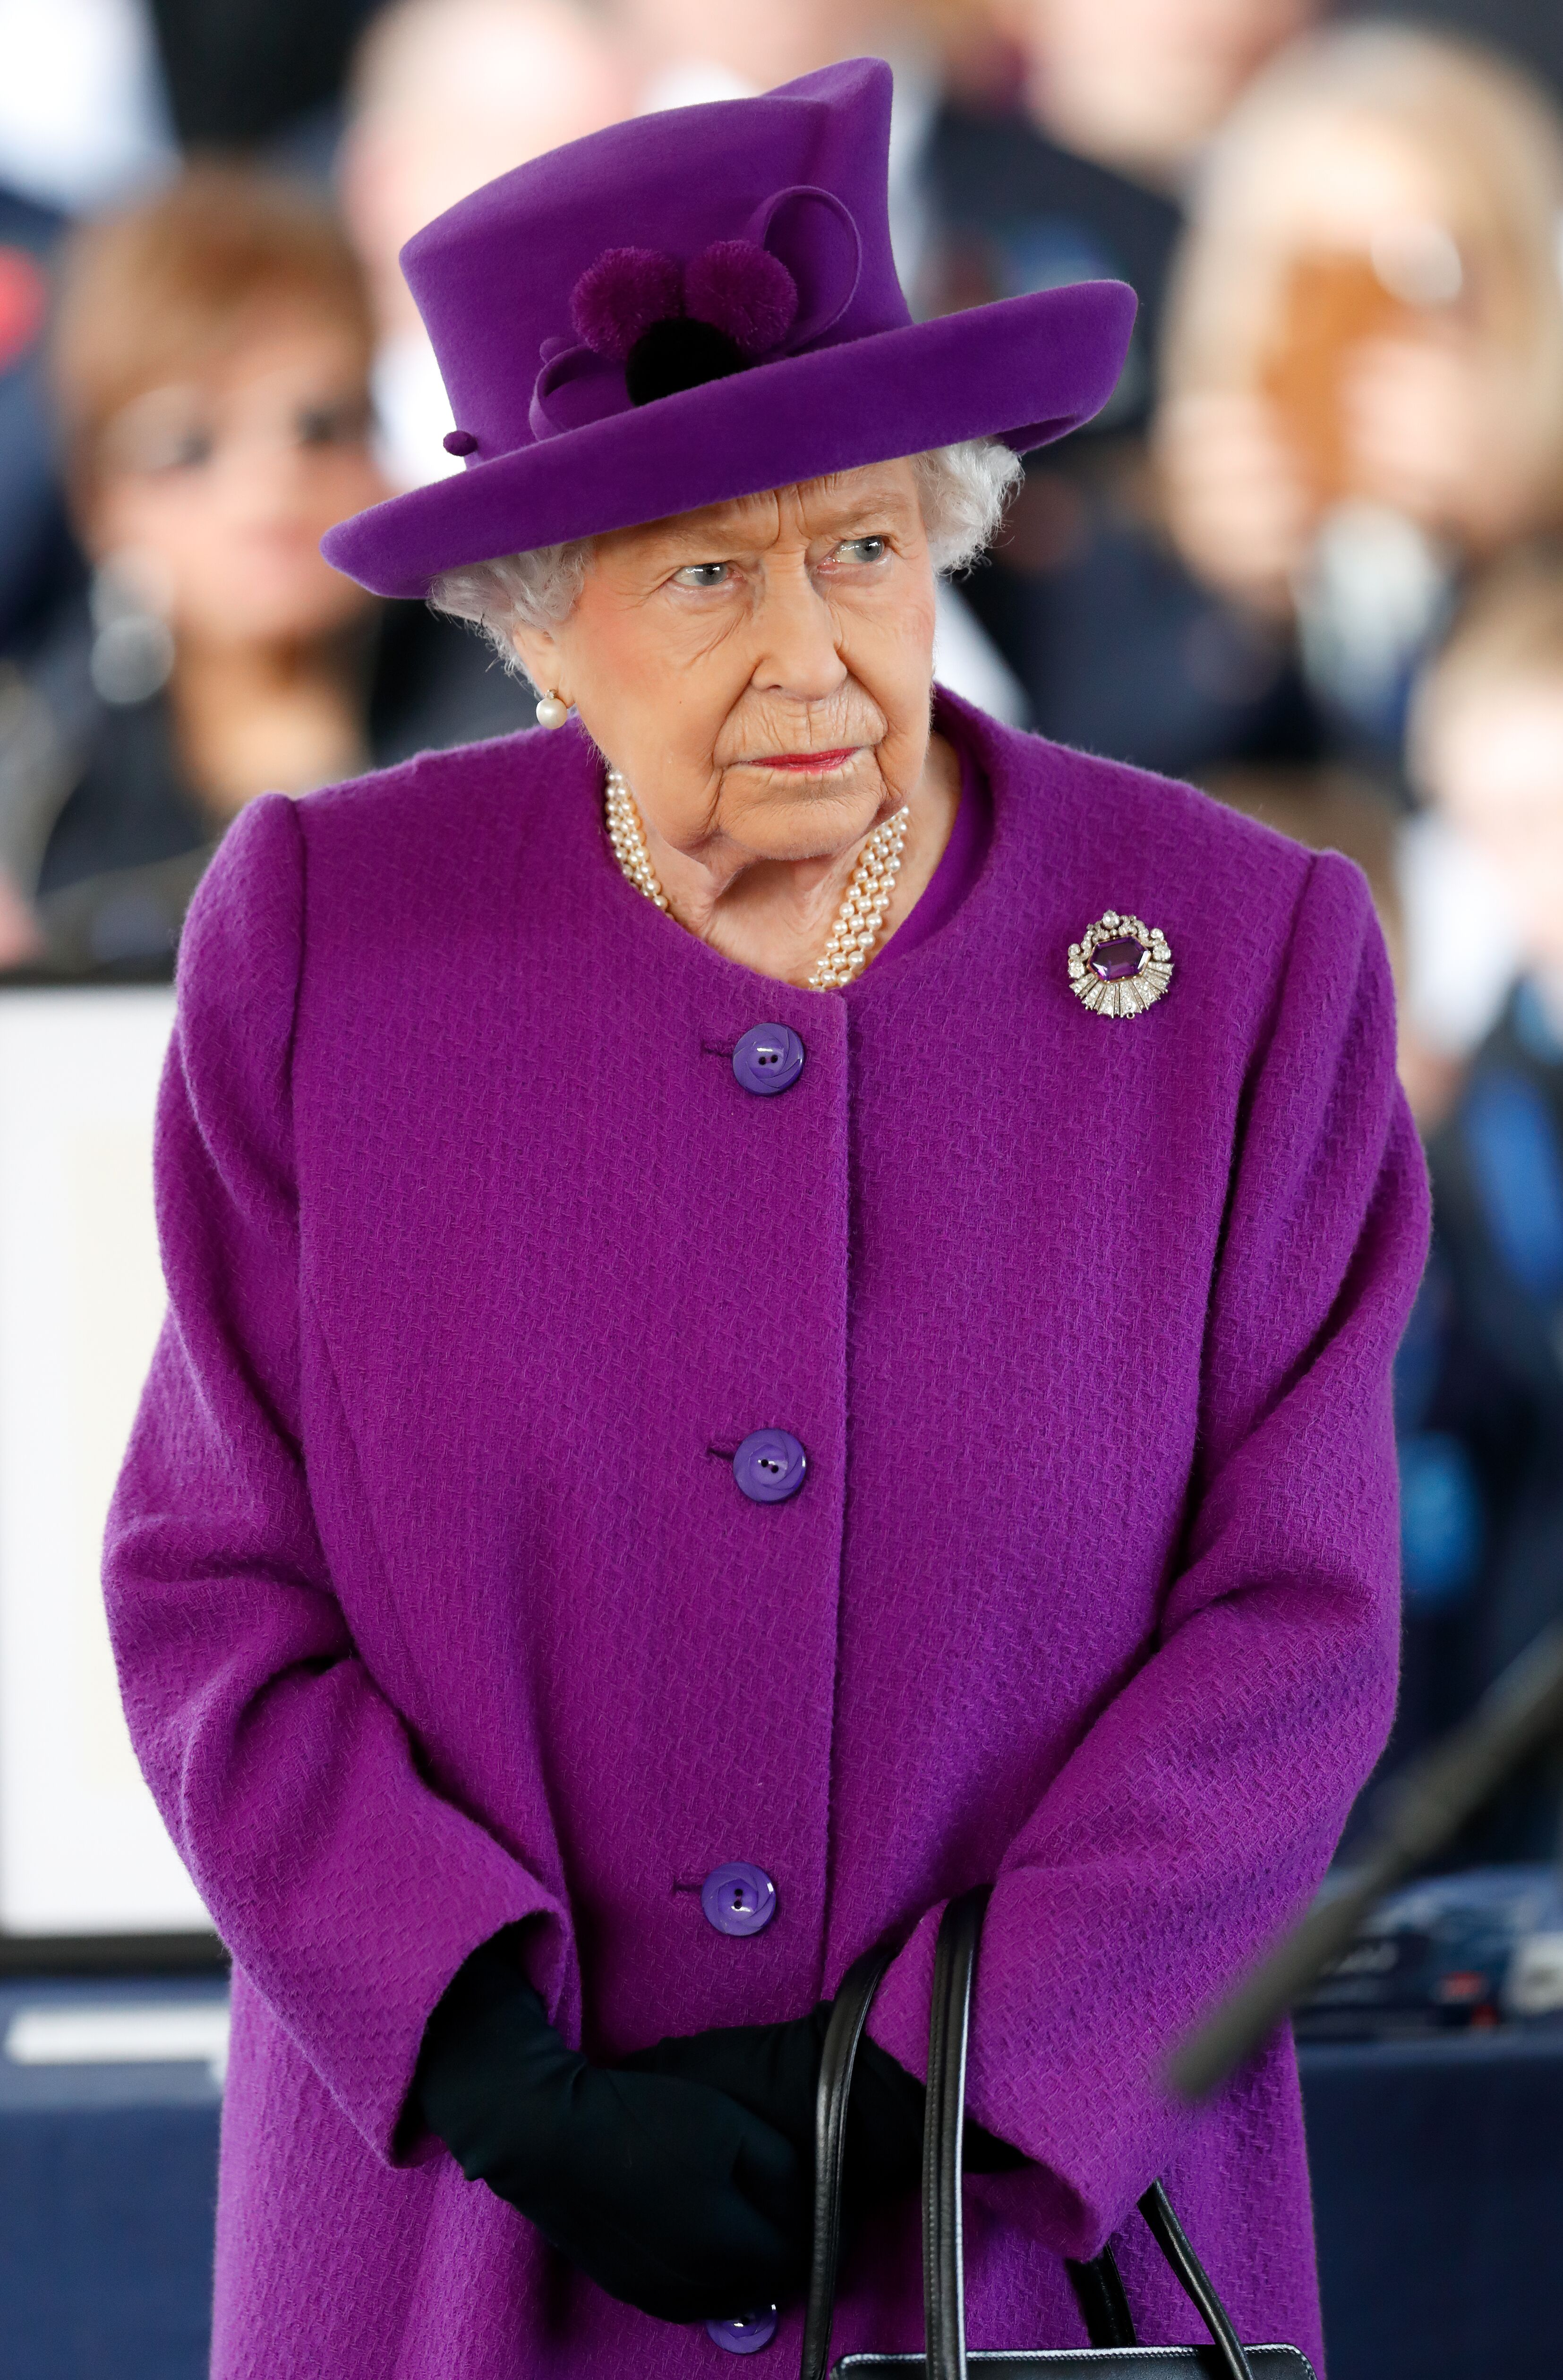 Queen Elizabeth II visits the Royal British Legion Industries village to celebrate the charity's centenary year on November 6, 2019 in Aylesford, England. | Source: Getty Images